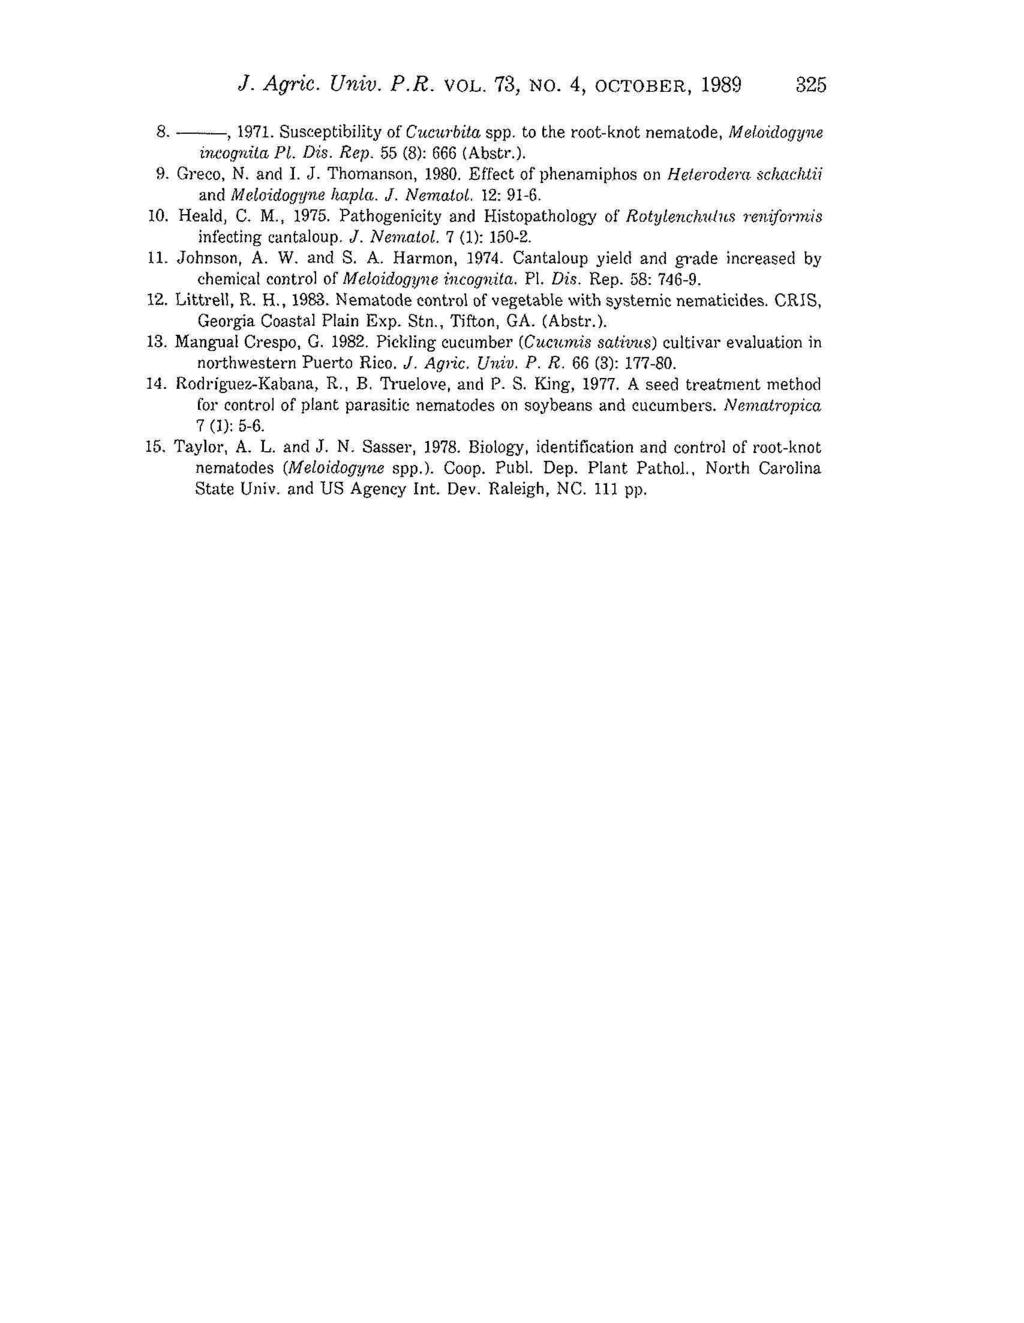 J. Agric. Univ. P.R. VOL. 73, NO. 4, OCTOBER, 1989 325 8. ~, 1971. Susceptibility of Cucurbita spp. to the root-knot nematode, Meloidogyne incognita PL Dis. Rep. 55 (8): 666 (Abstr.). 9. Greco, N.